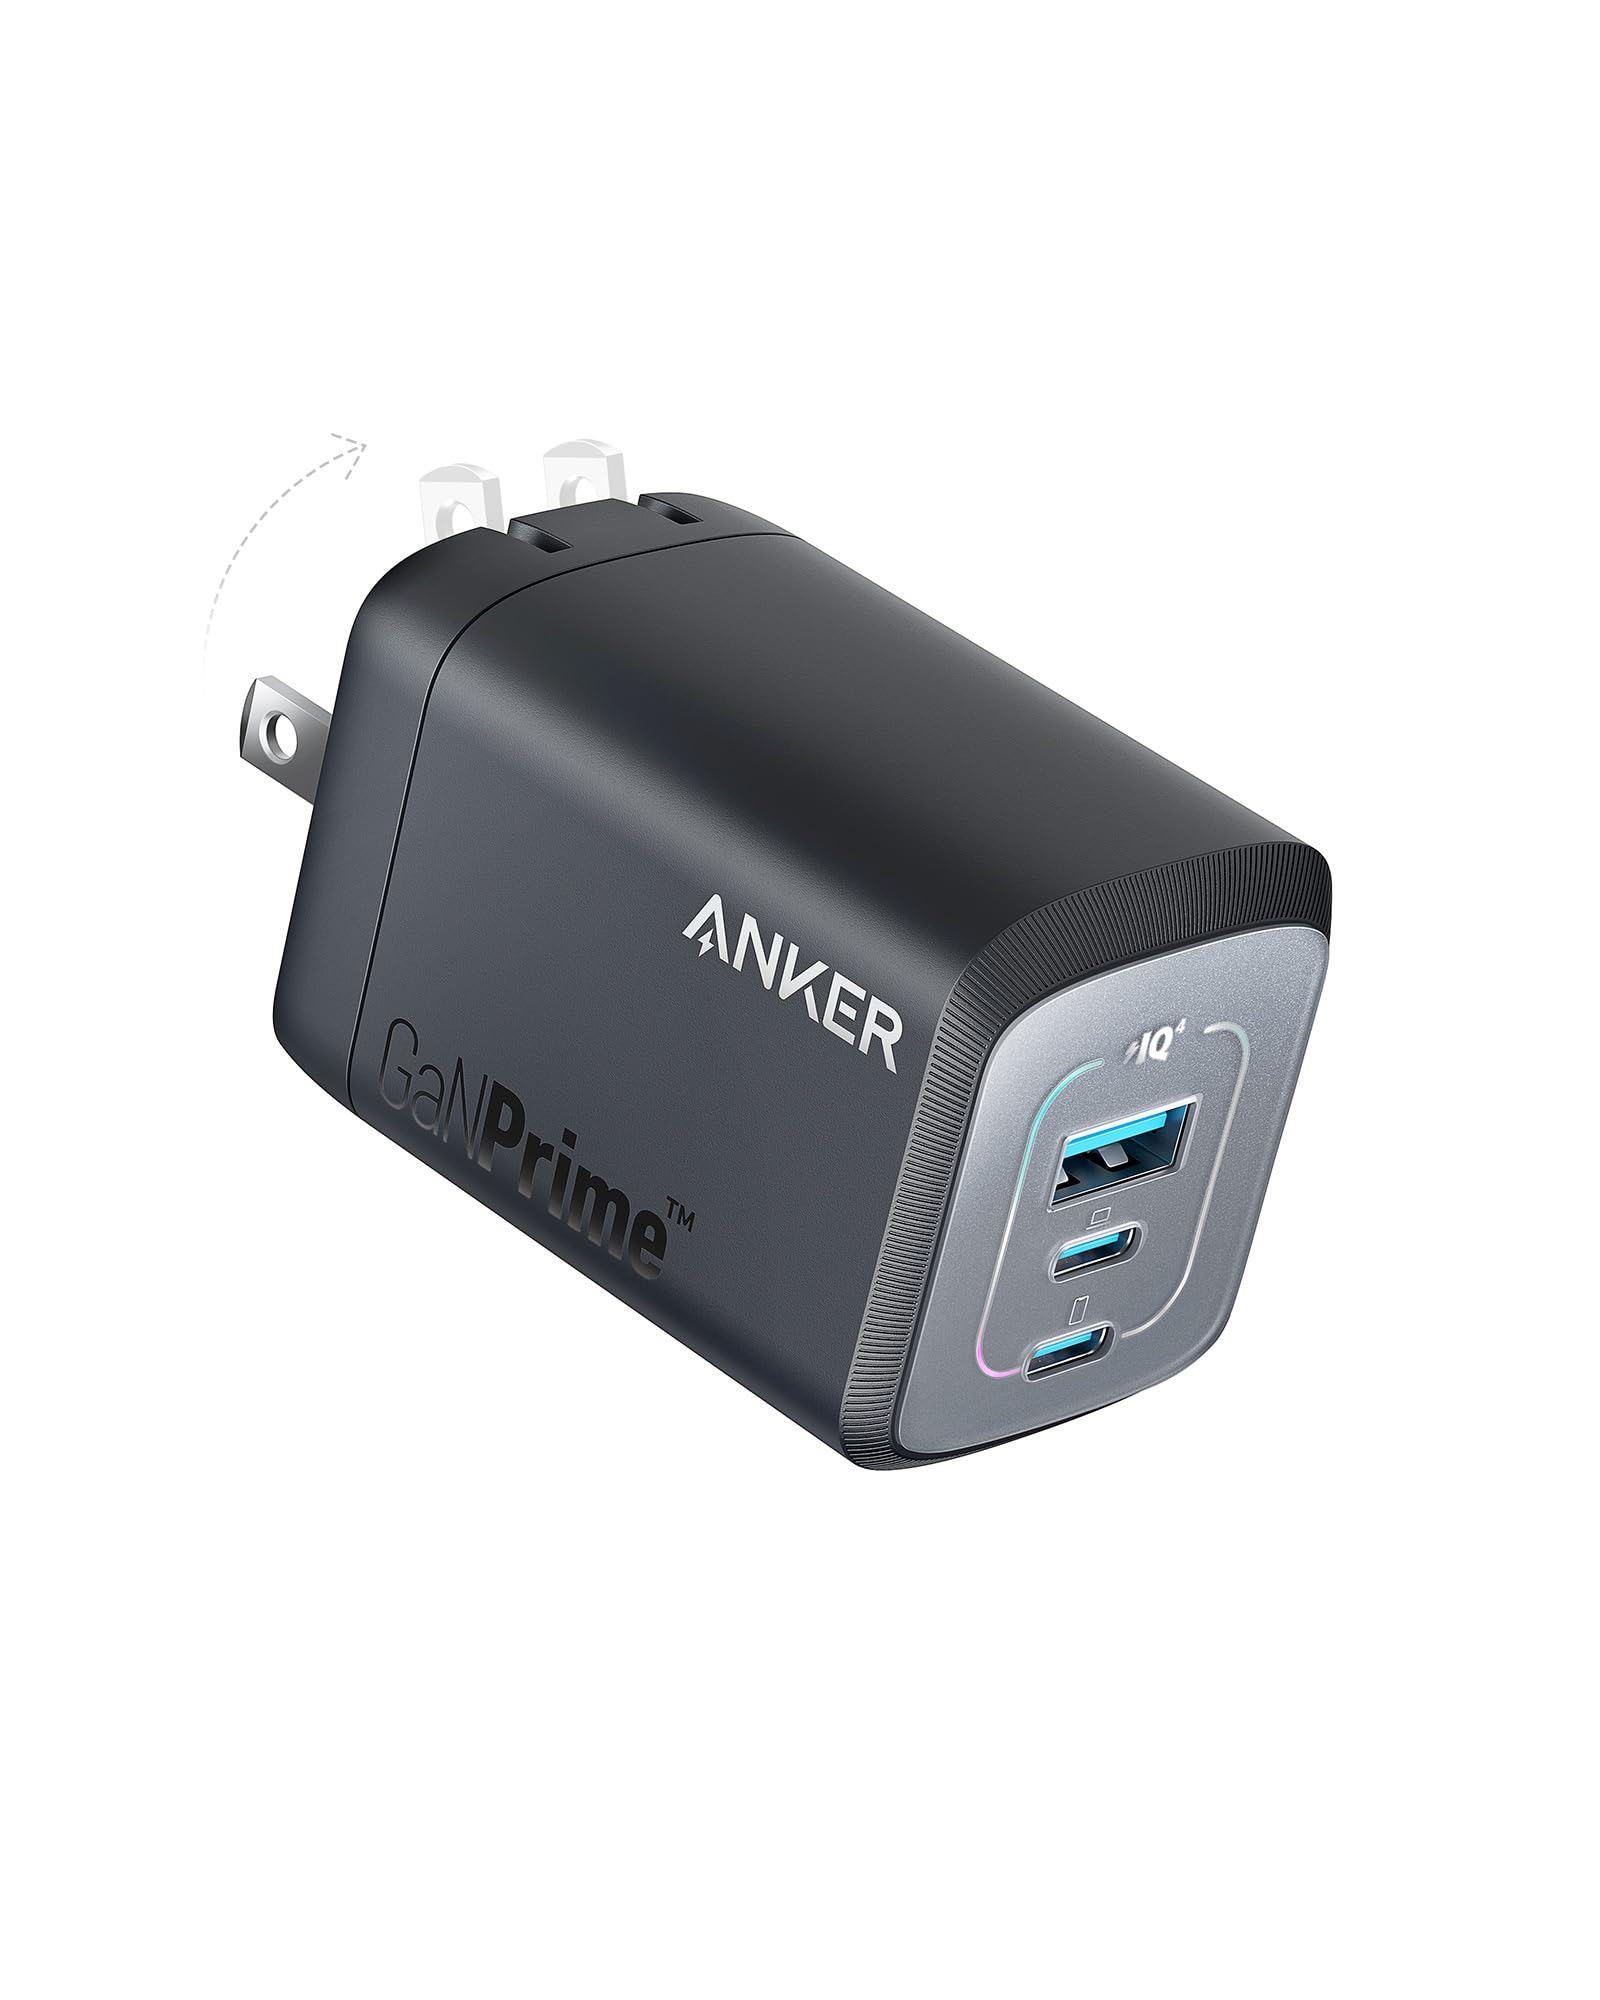 Anker Prime 100W USB C Charger, Anker GaN Wall Charger, 3-Port Compact Fast PPS $54.39